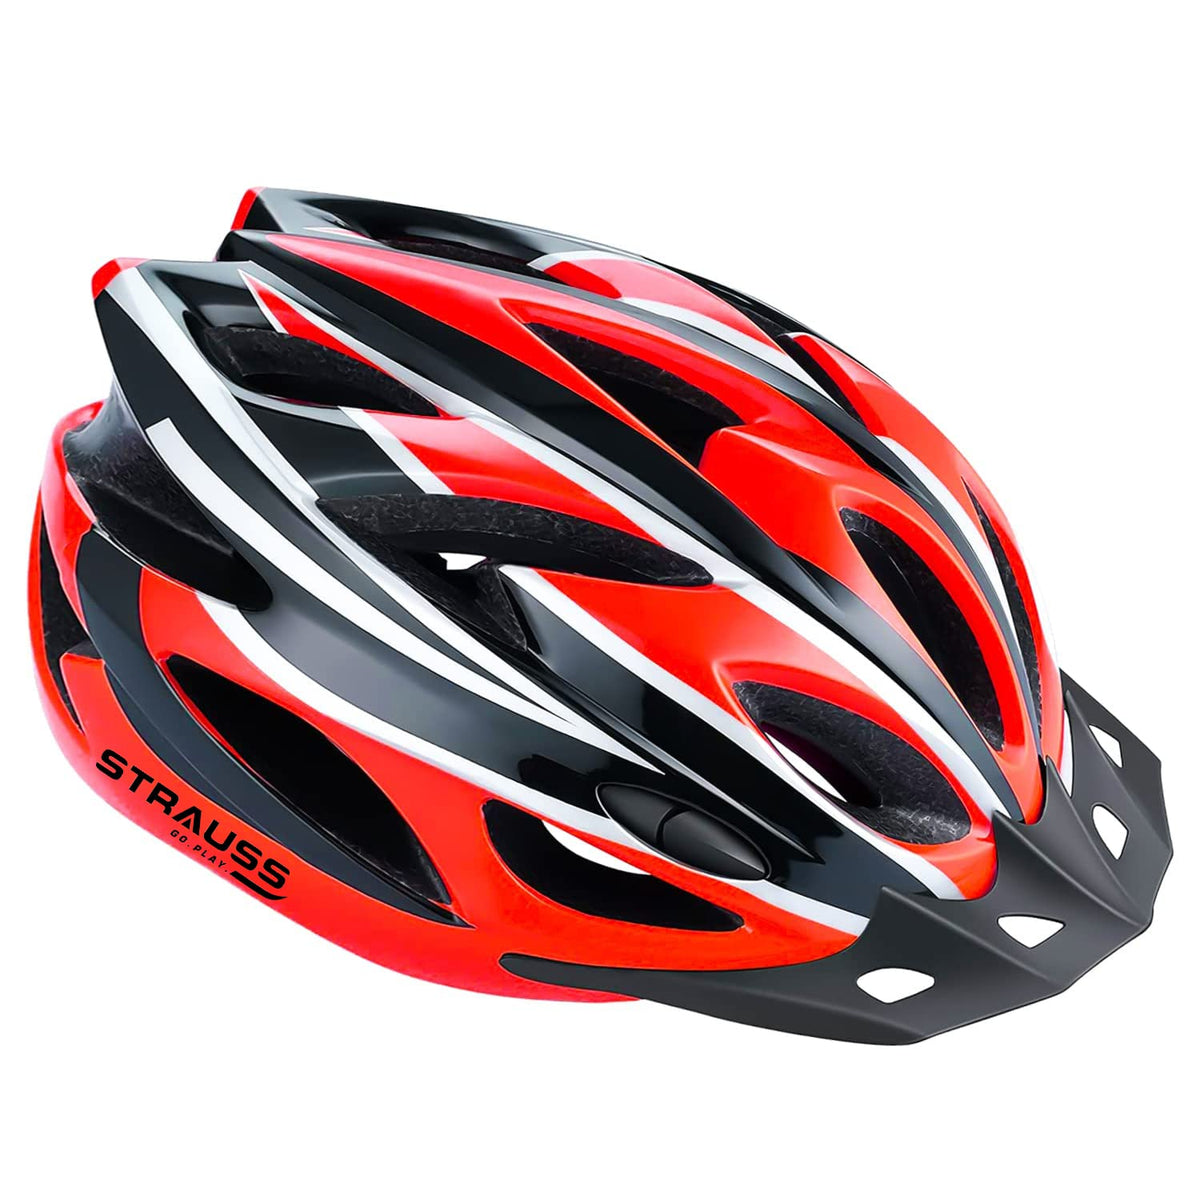 Strauss Adjustable Cycling Helmet with Detachable Visor | Light Weight with Superior Ventilation | Mountain, Road Bike & Skating Helmet | Ideal for Adults and Kids, (Black/Red)